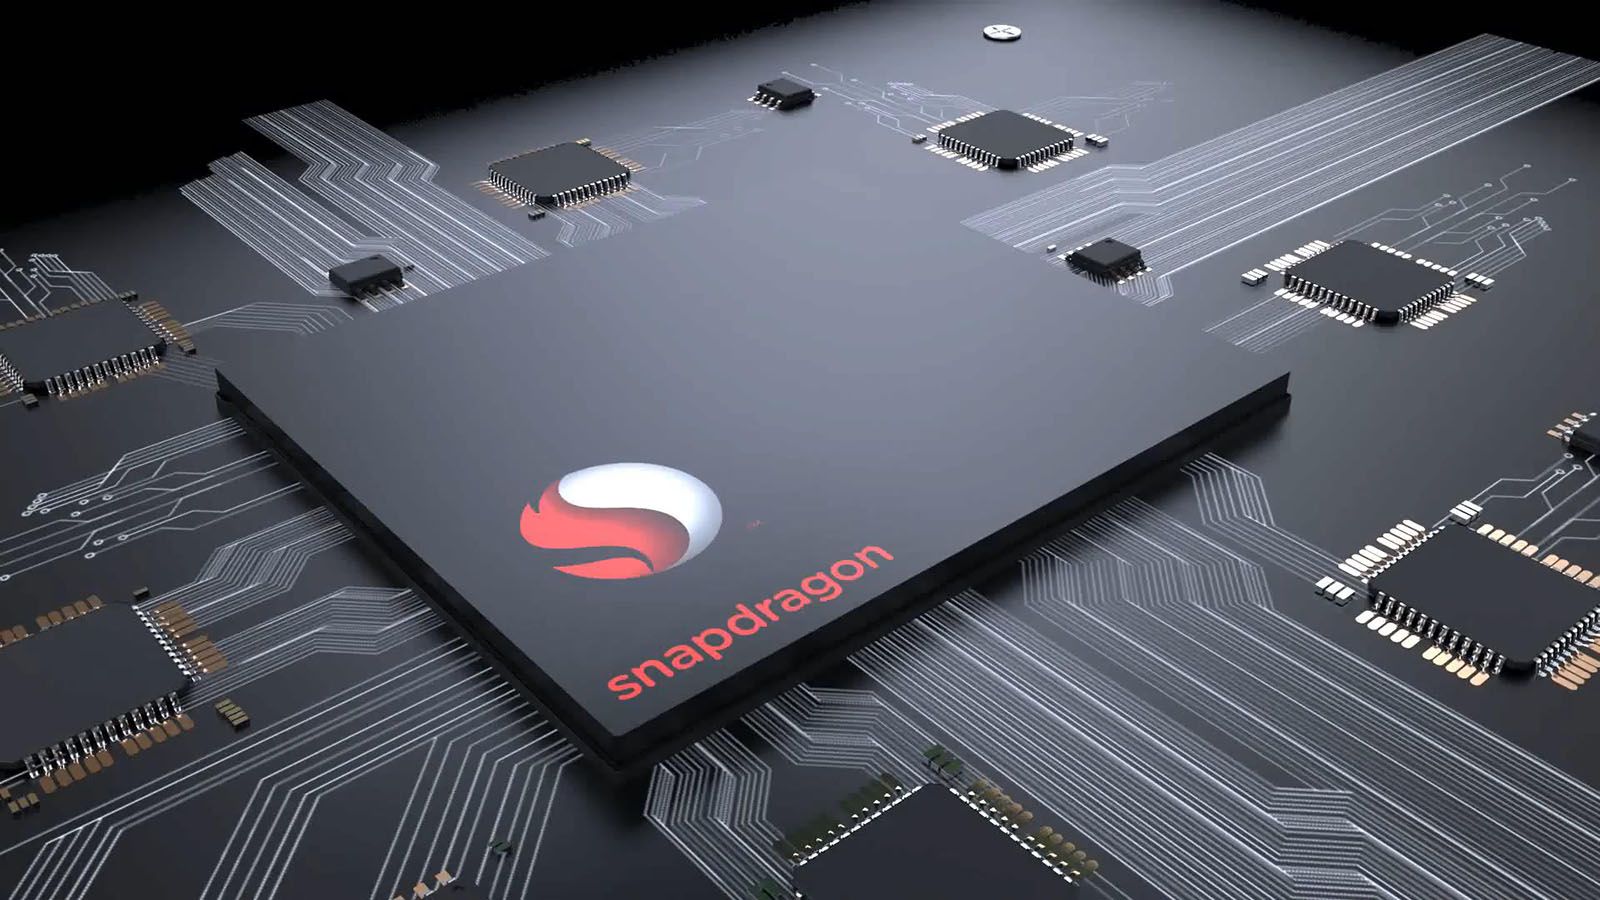 Qualcomm Snapdragon Wallpaper.GiftWatches.CO